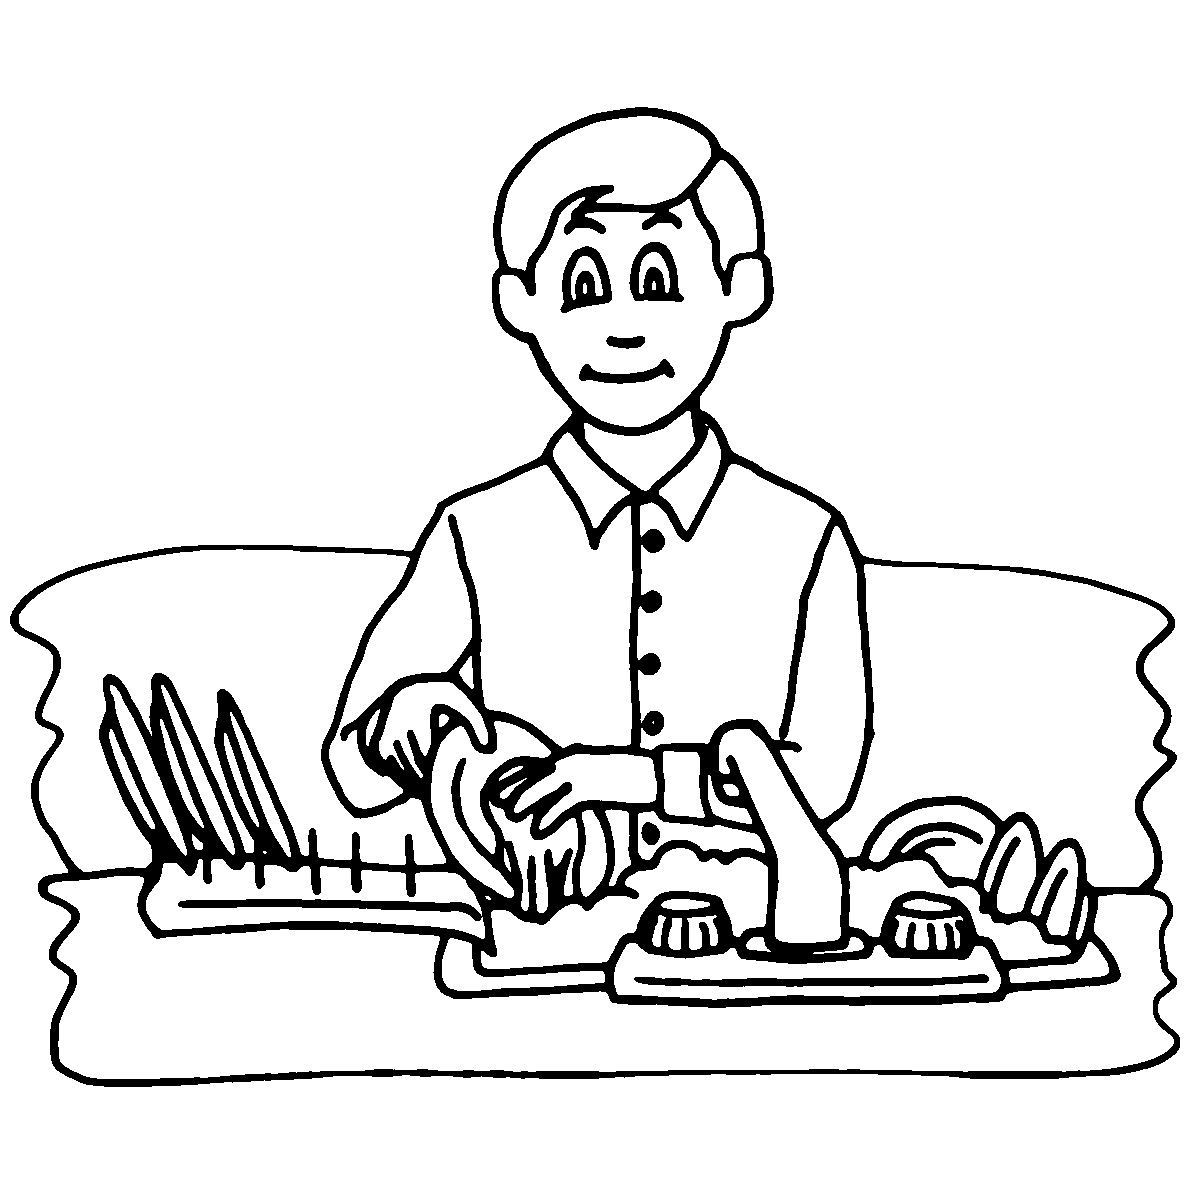 Make bed clipart black and white